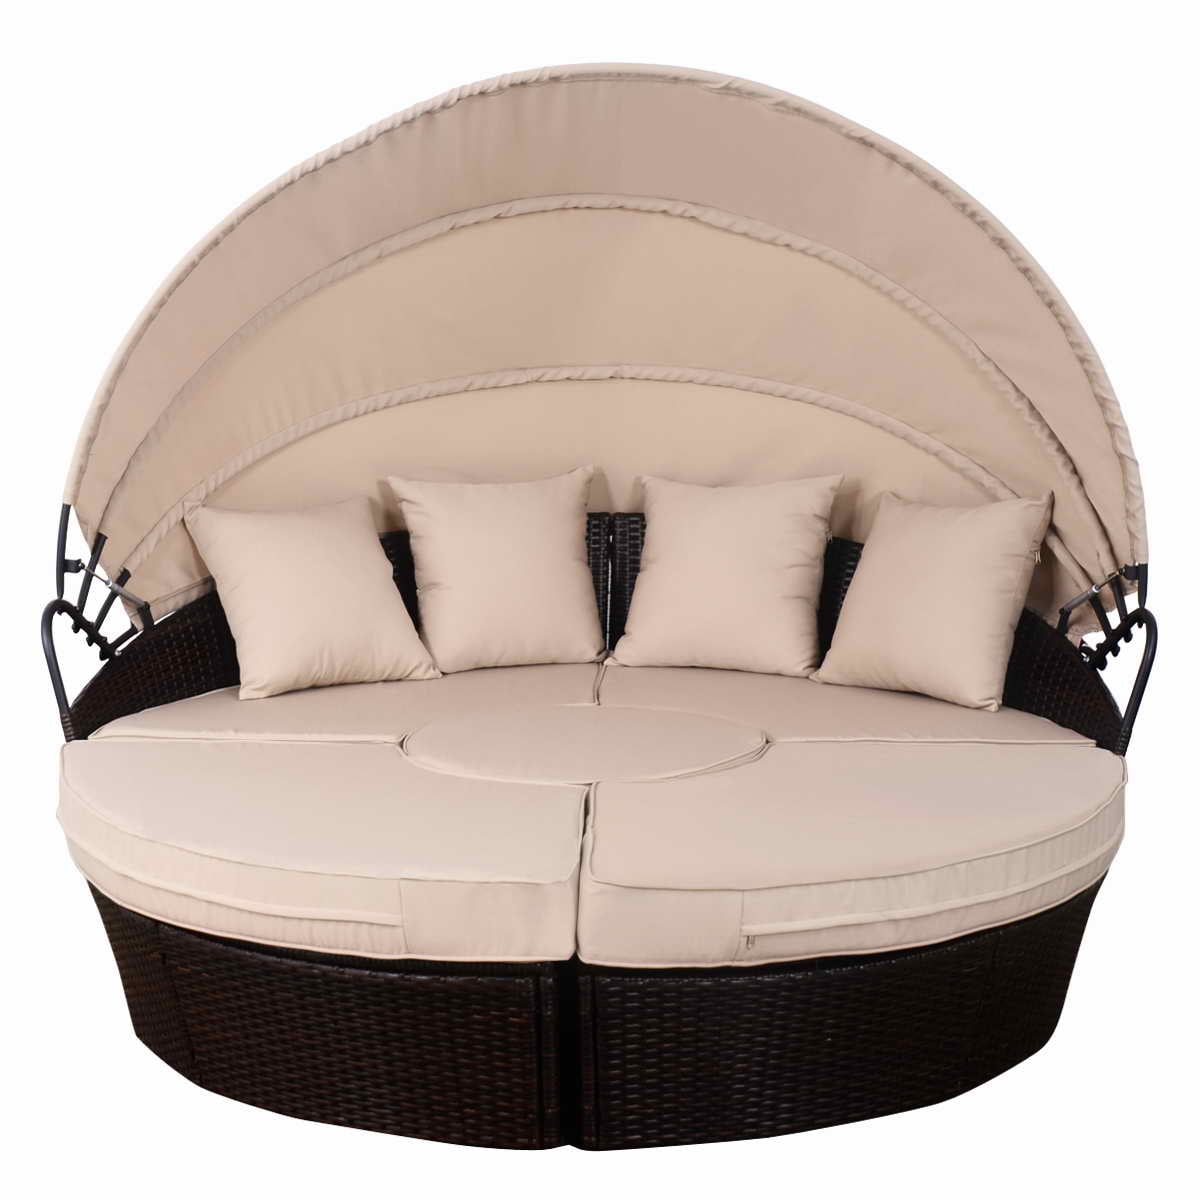 Topbuy Outdoor Patio Sofa Round Daybed Wicker Rattan